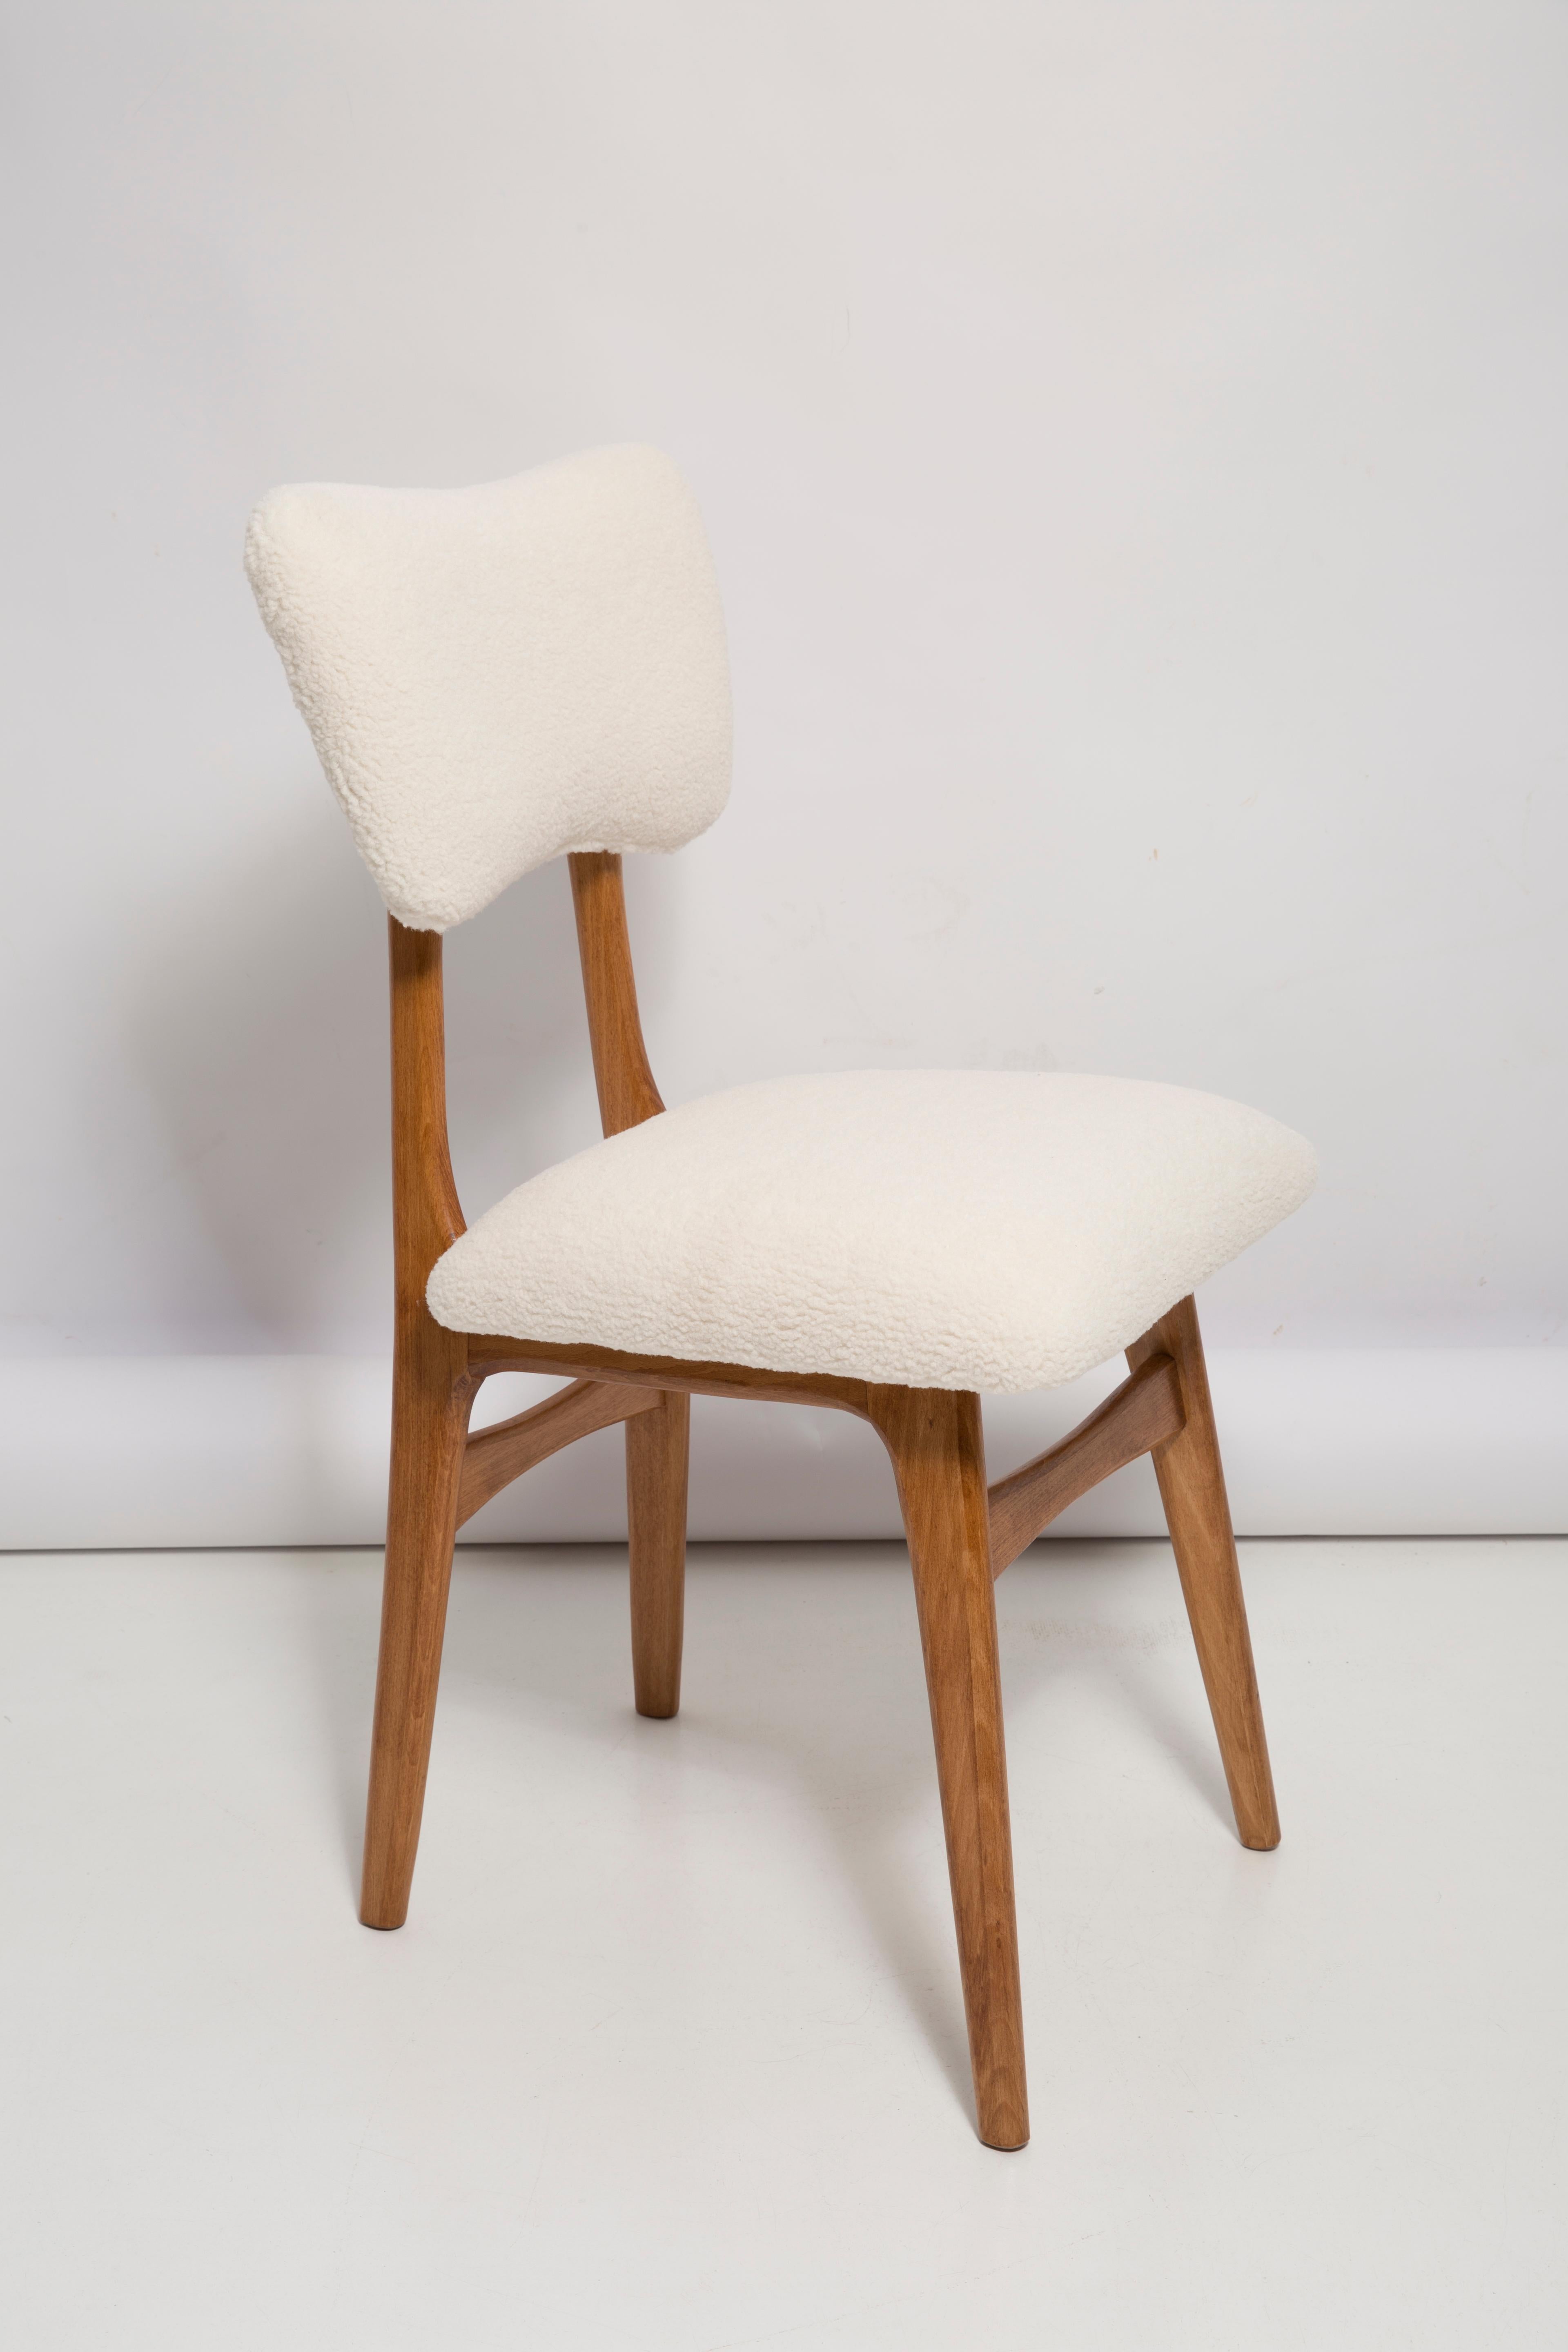 Chairs designed by Prof. Rajmund Halas. Made of beechwood. Chairs are after a complete upholstery renovation; the woodwork has been refreshed and painted in cherry lacquer. Seat and back is dressed in light cream (color 01), durable and pleasant to